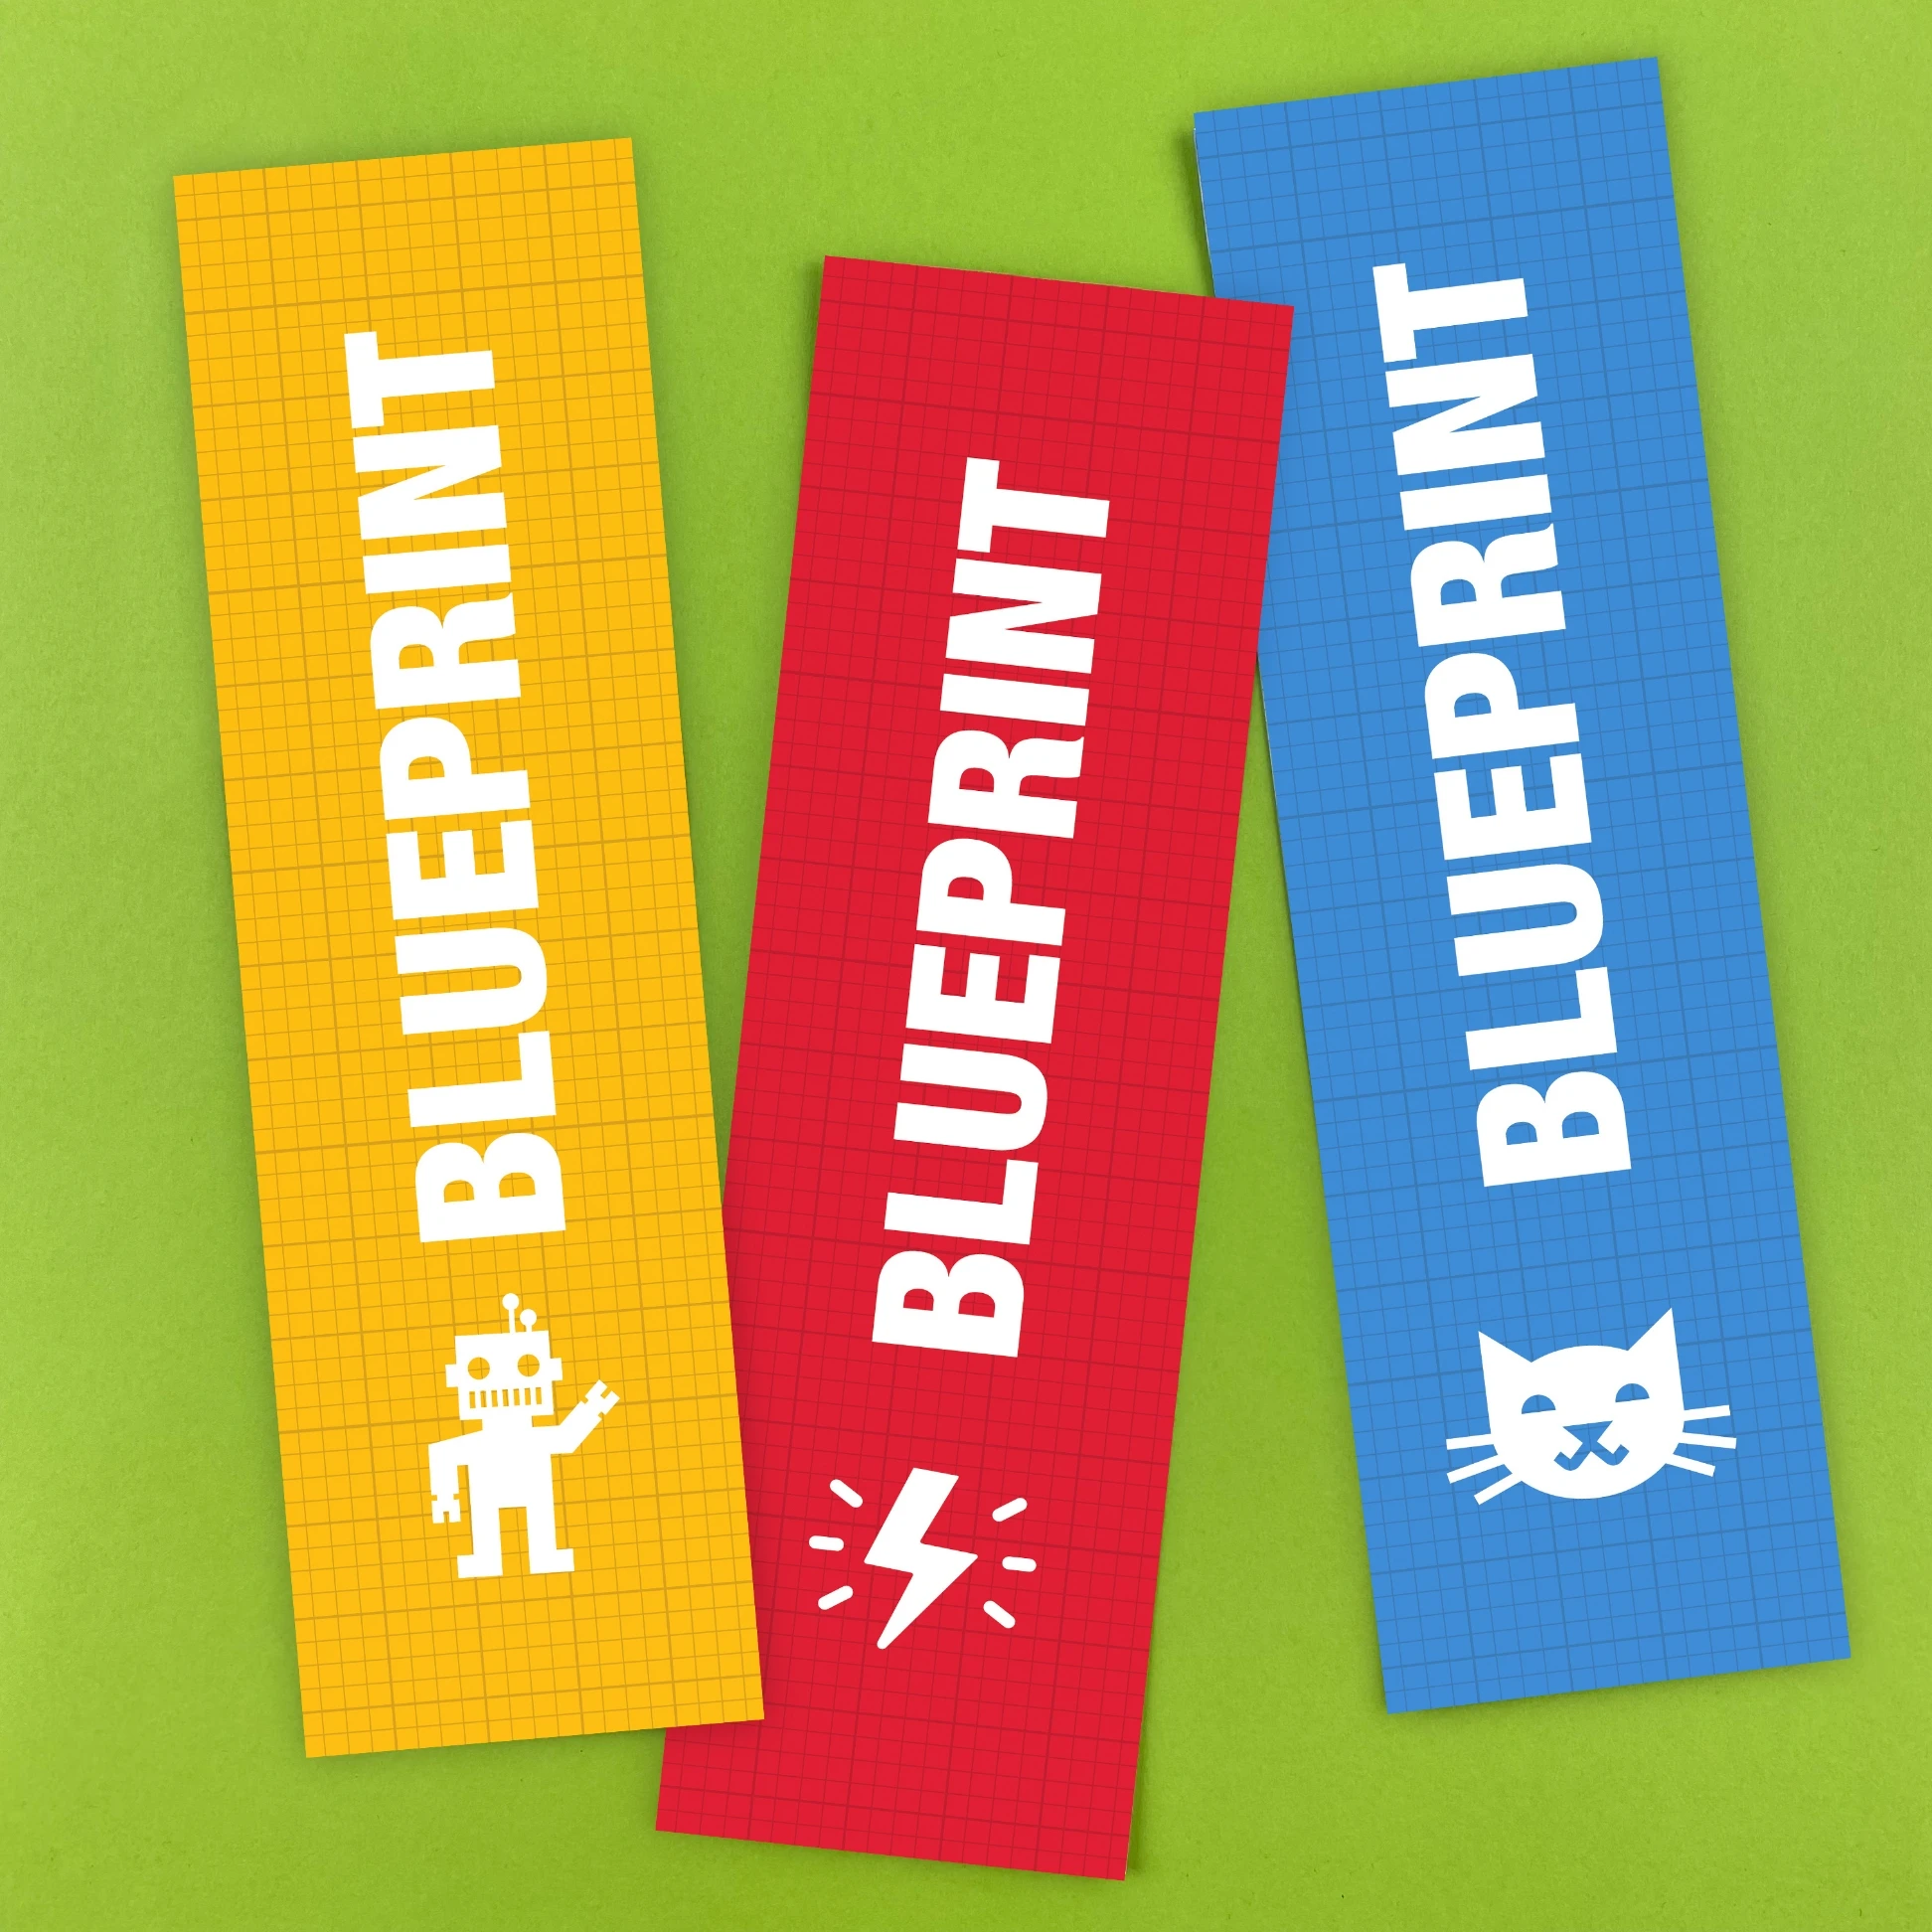 A group of colorful rectangular banners.